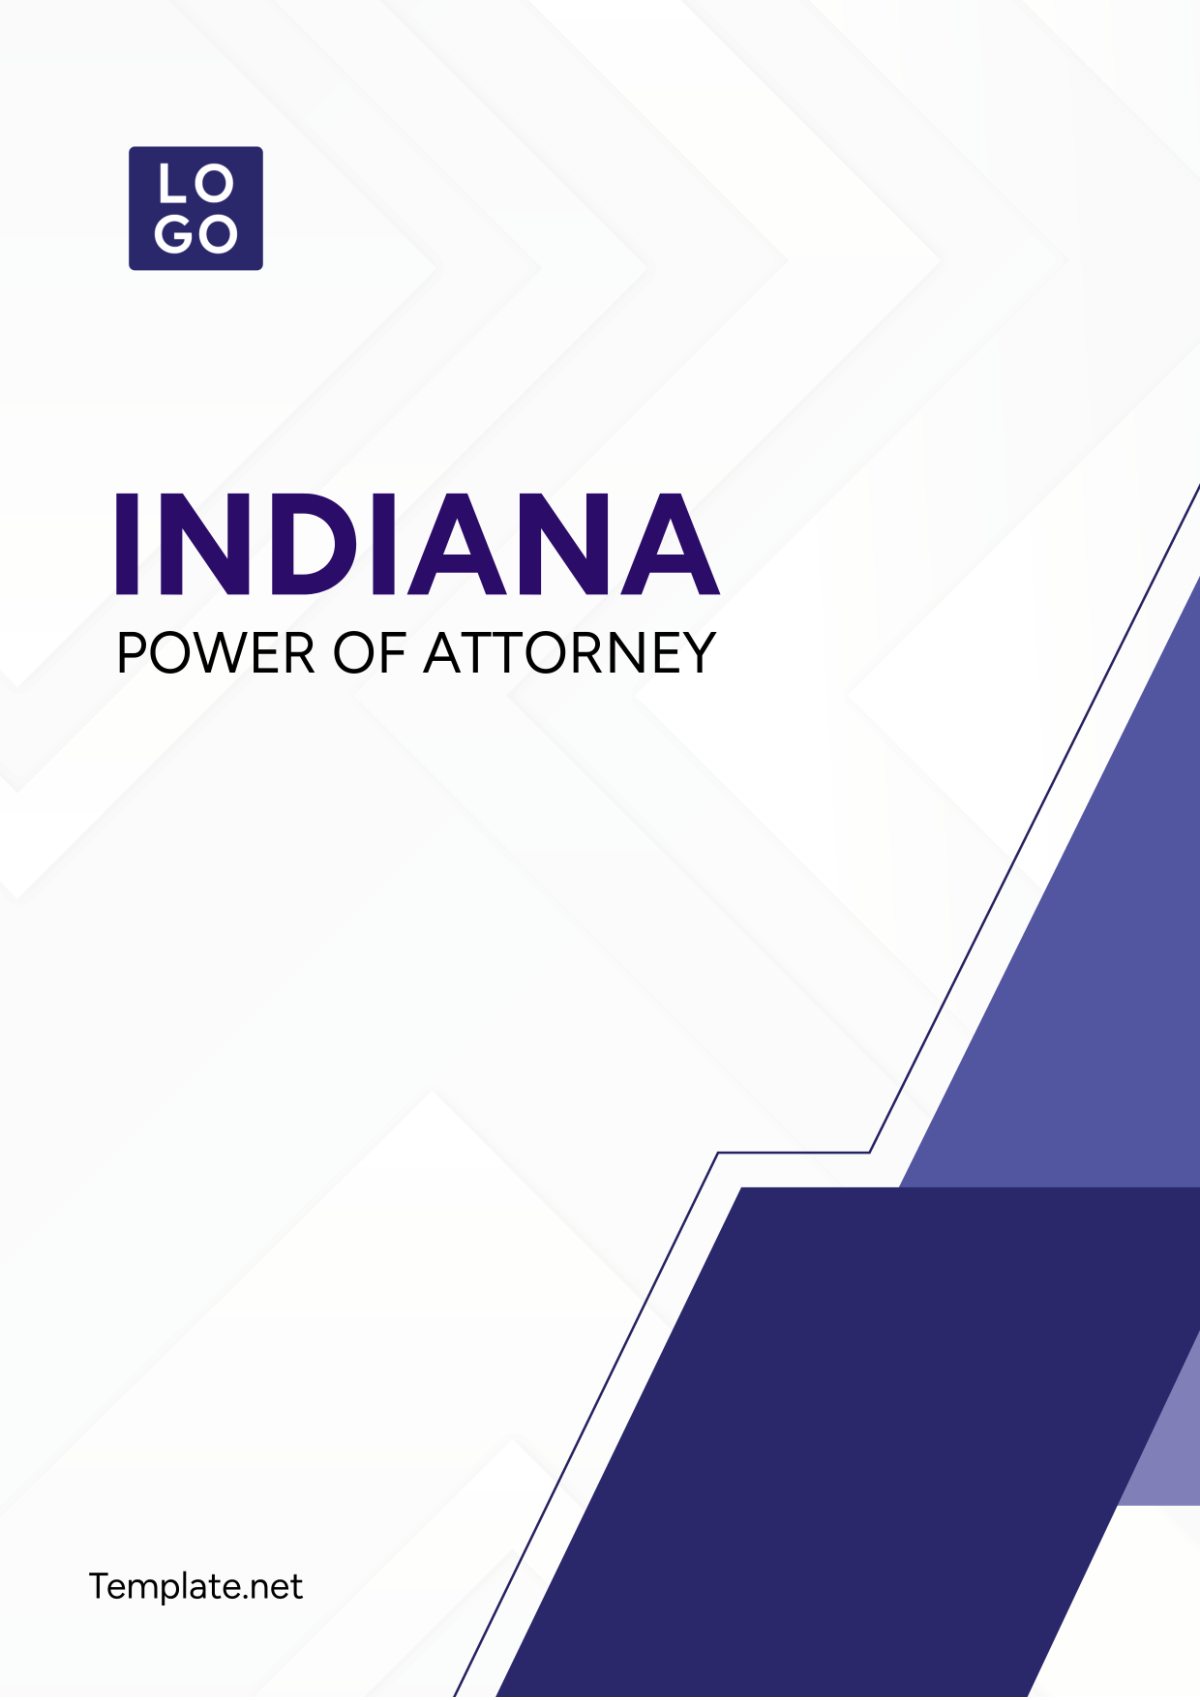 Indiana Power of Attorney Template